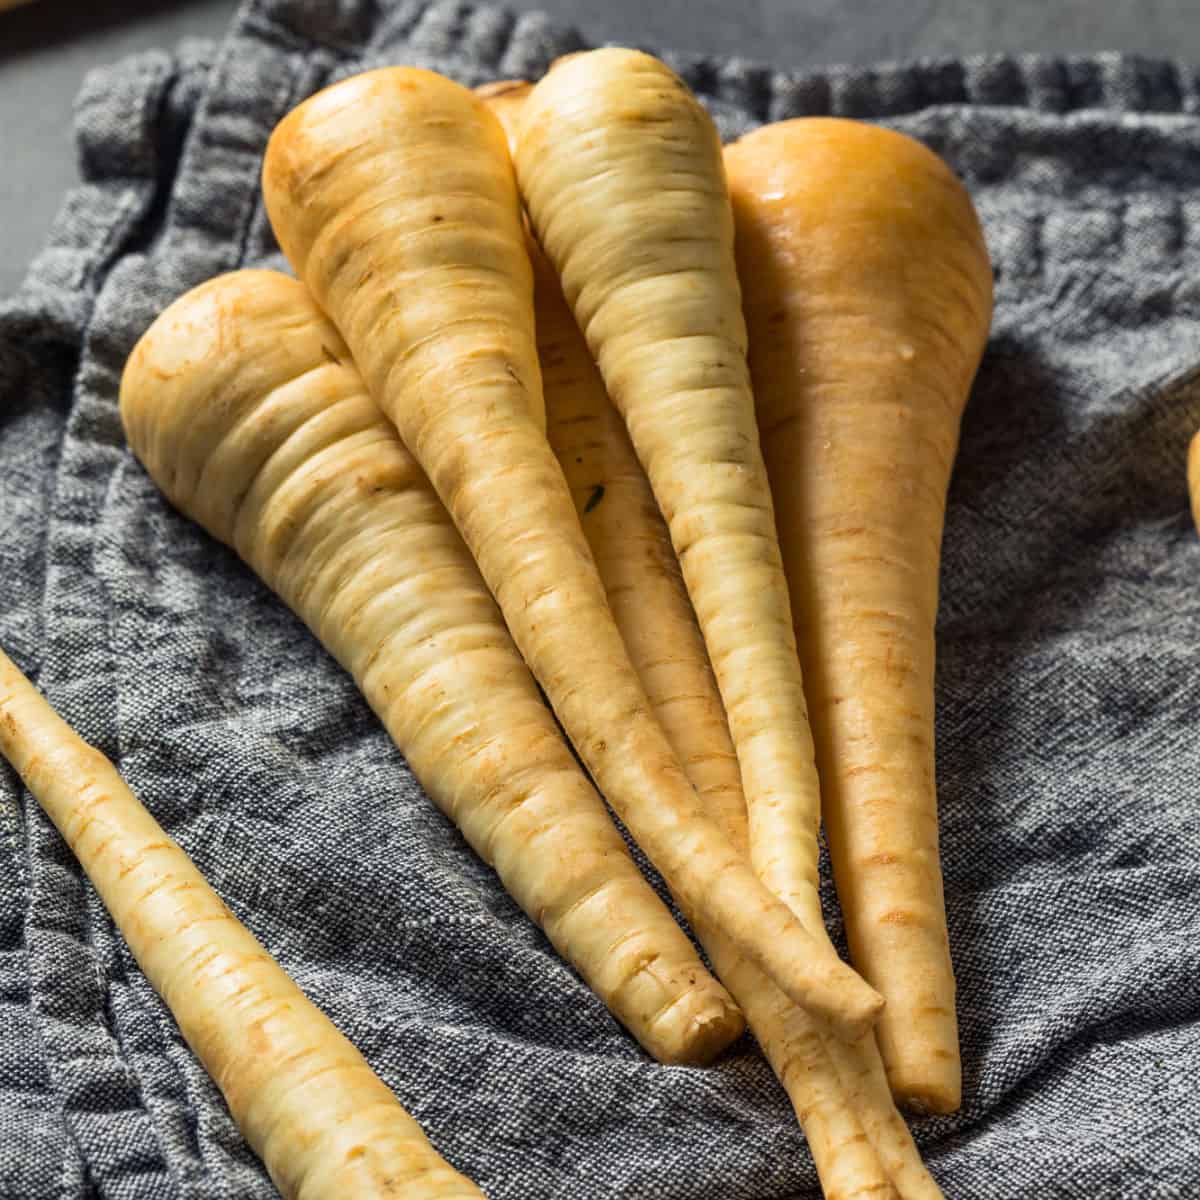 A pile of parsnips.